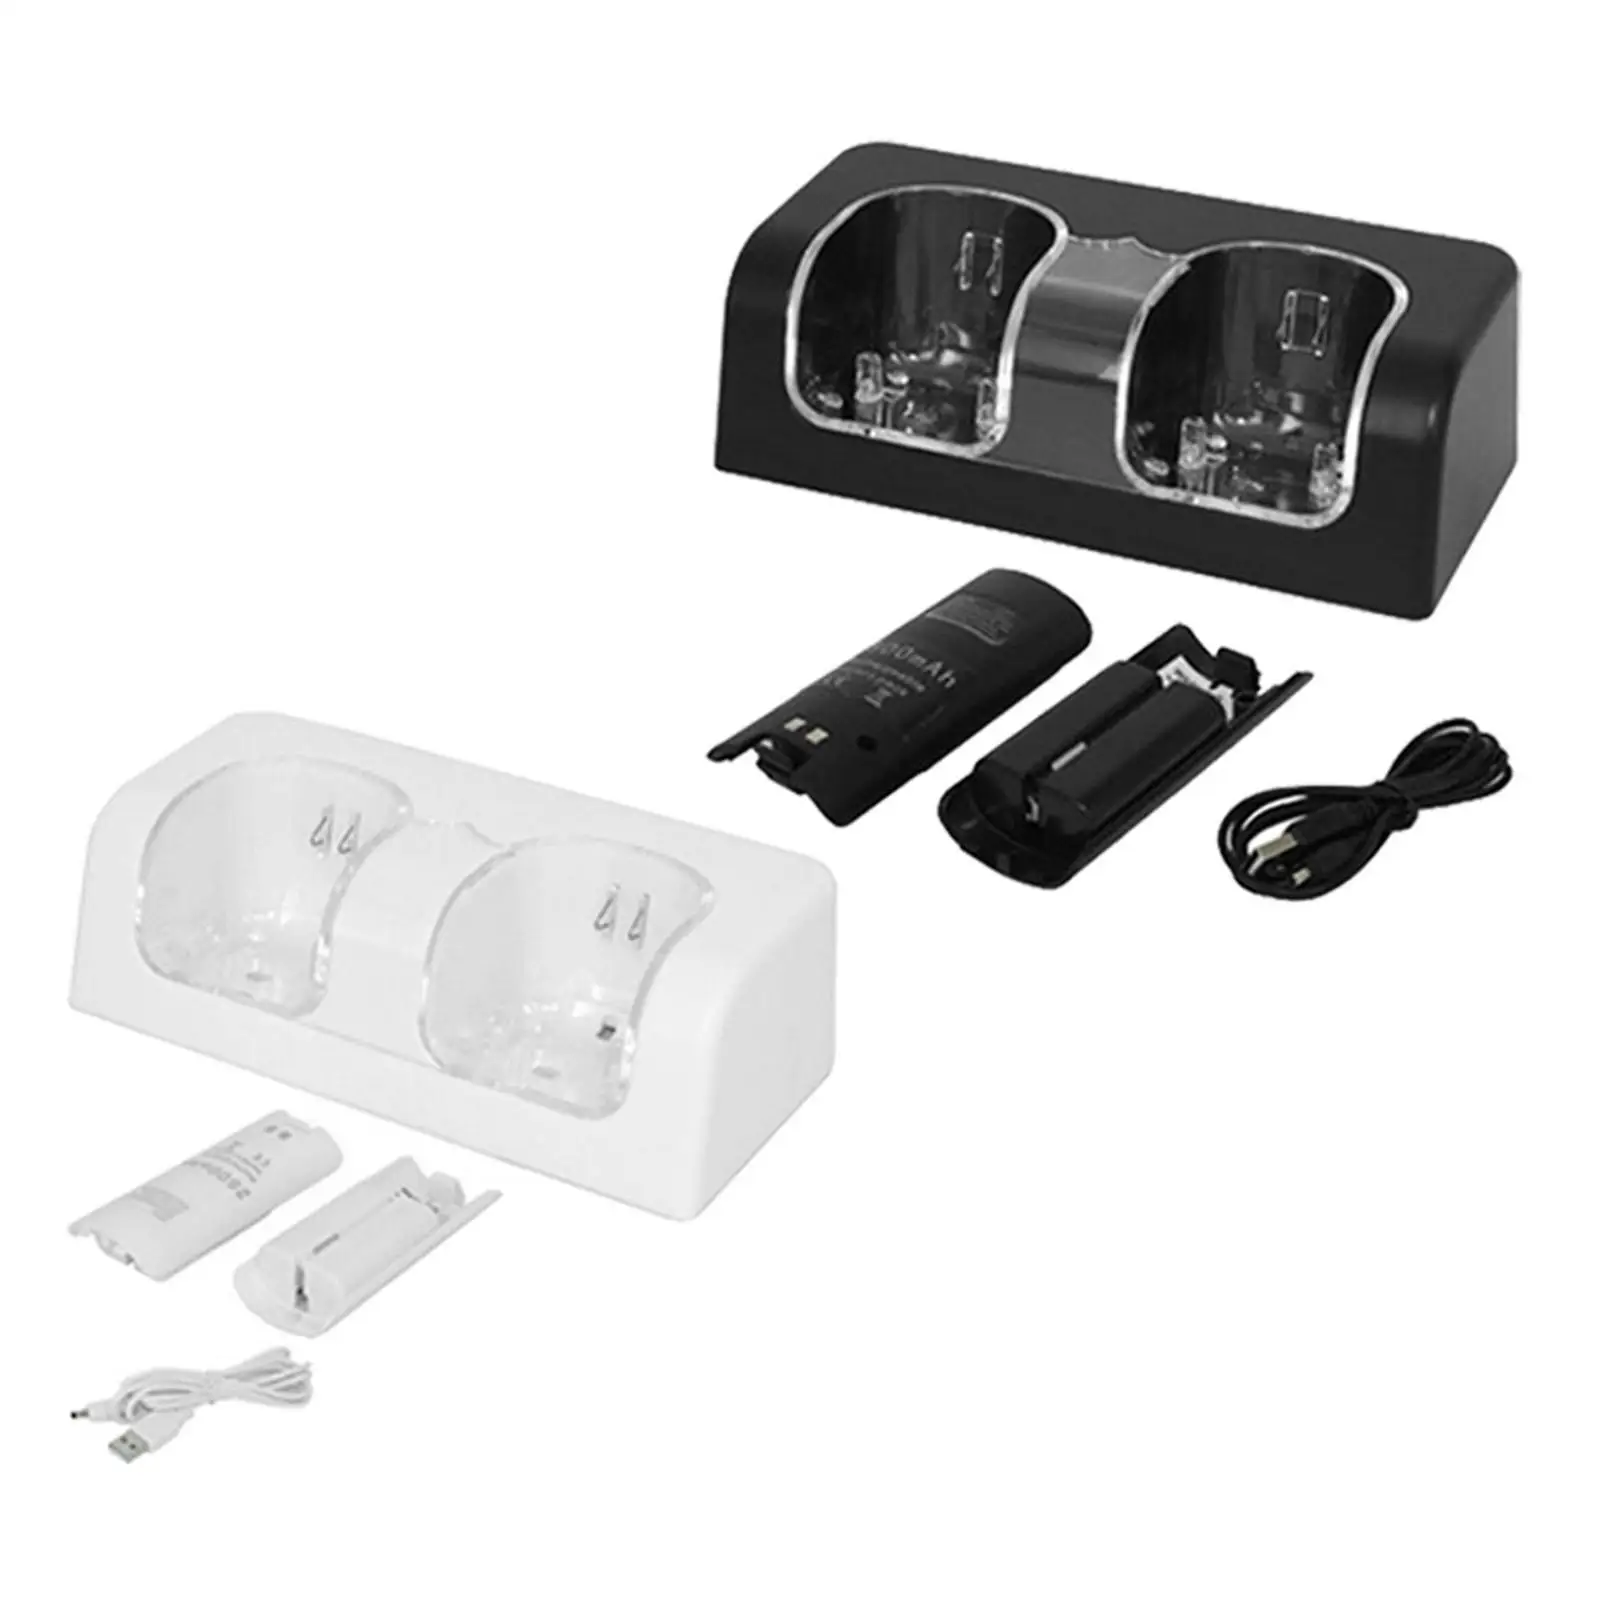 2 in 1 Smart Charger Charging Dock Station with Lengthened Cord for Wii Game Console Game Accessories